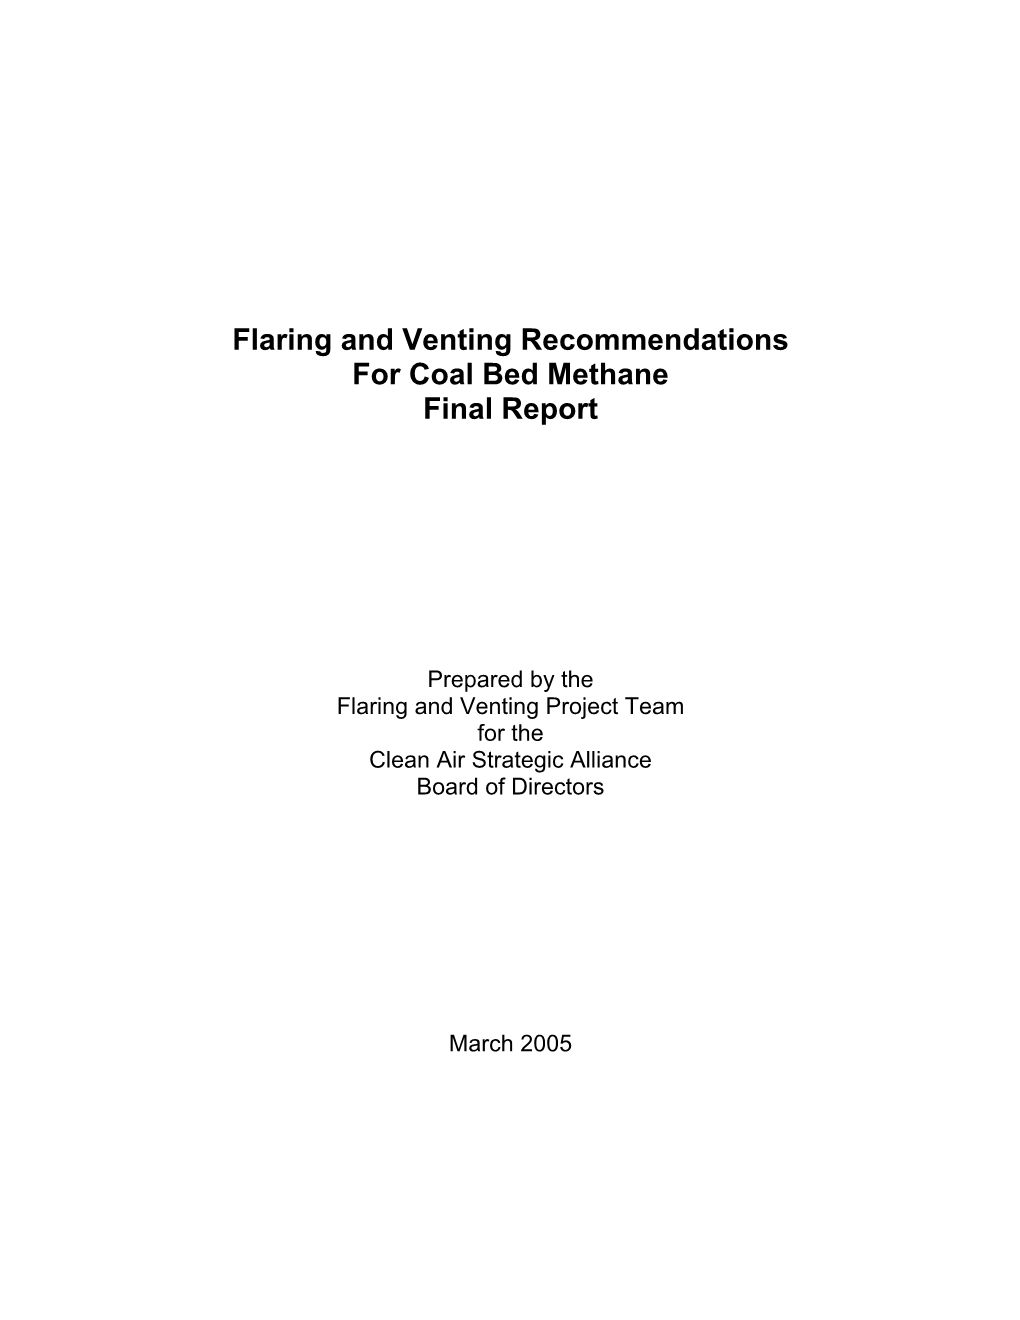 Flaring and Venting Recommendations for Coal Bed Methane Final Report